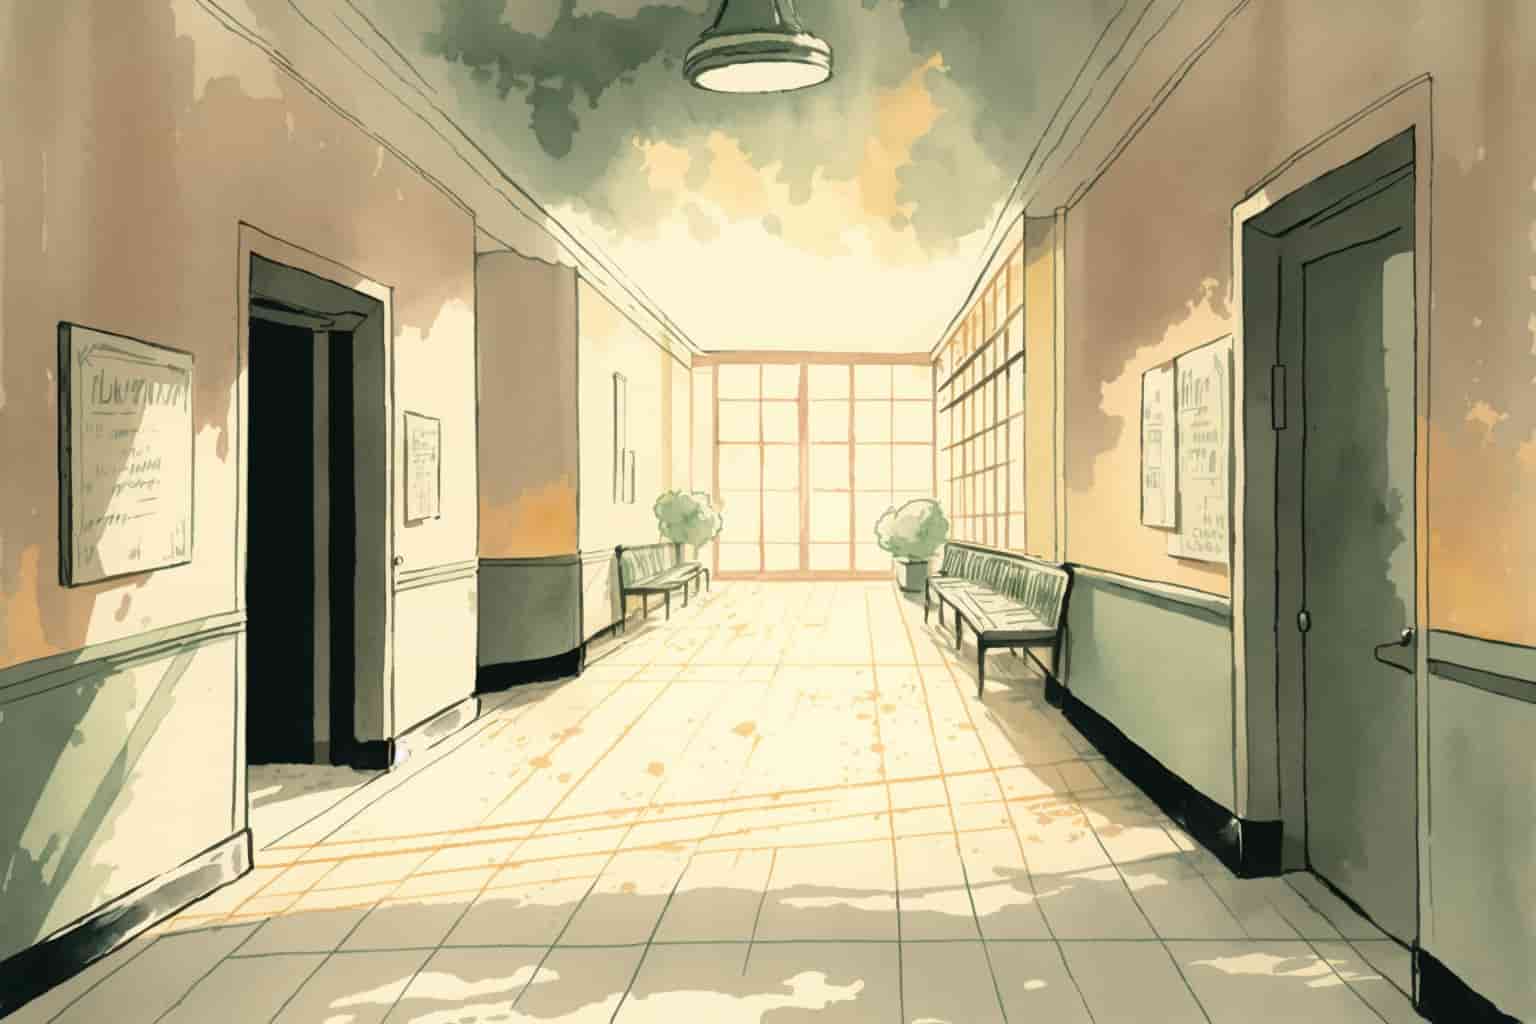 watercolor illustration of an empty hallway in a hospital